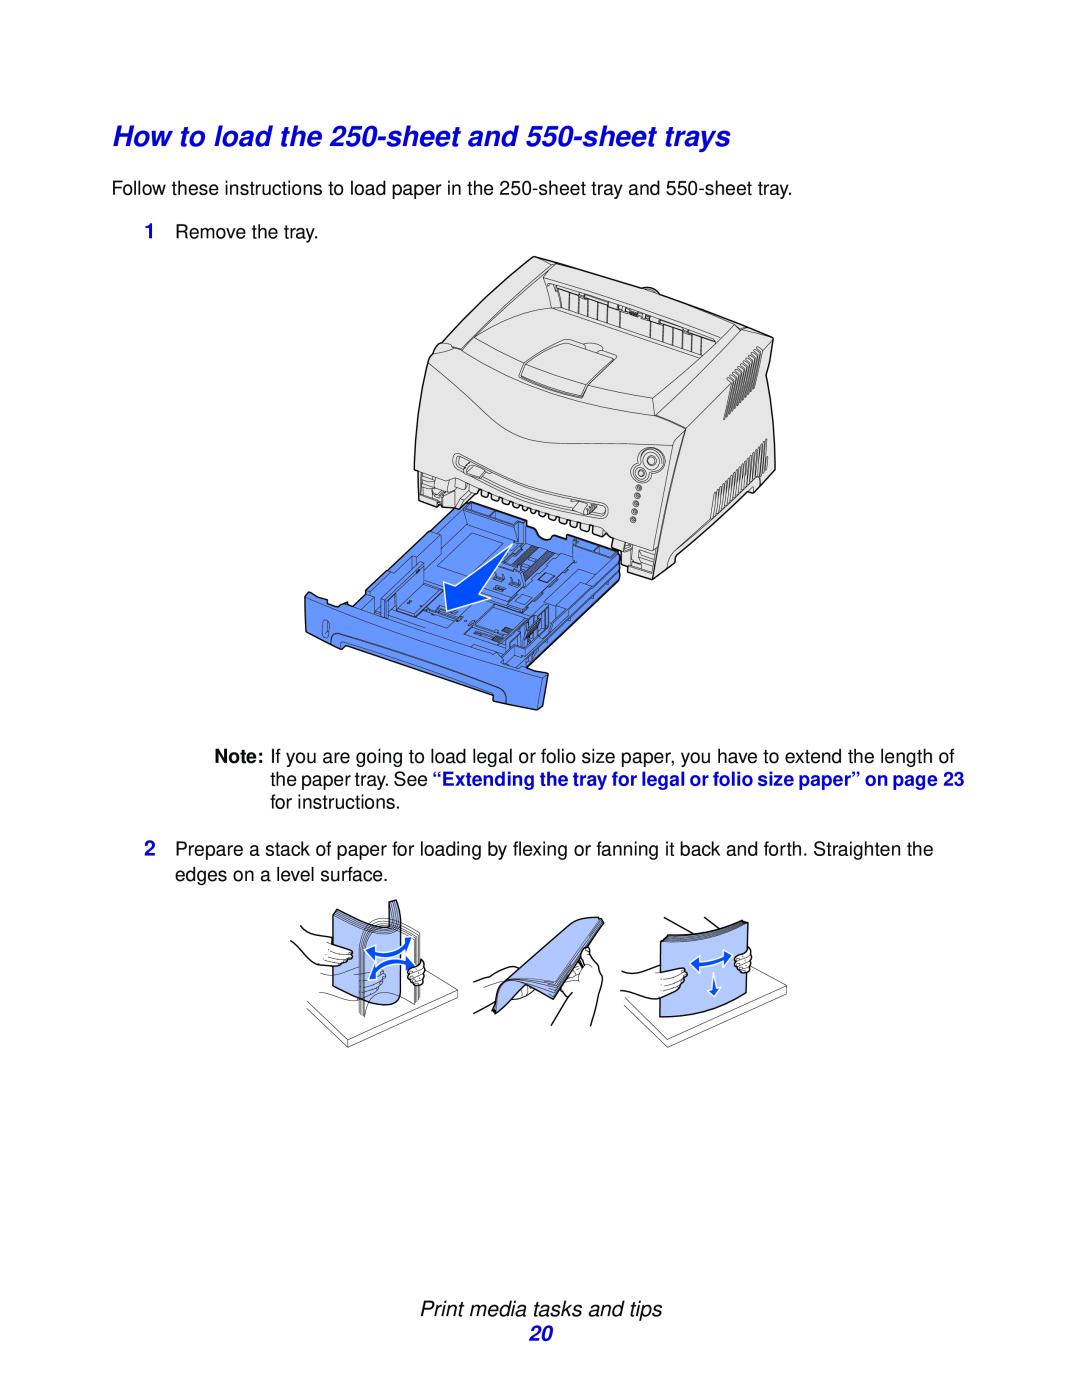 Lexmark 230, 232, E332n manual How to load the 250-sheet and 550-sheet trays, Print media tasks and tips 